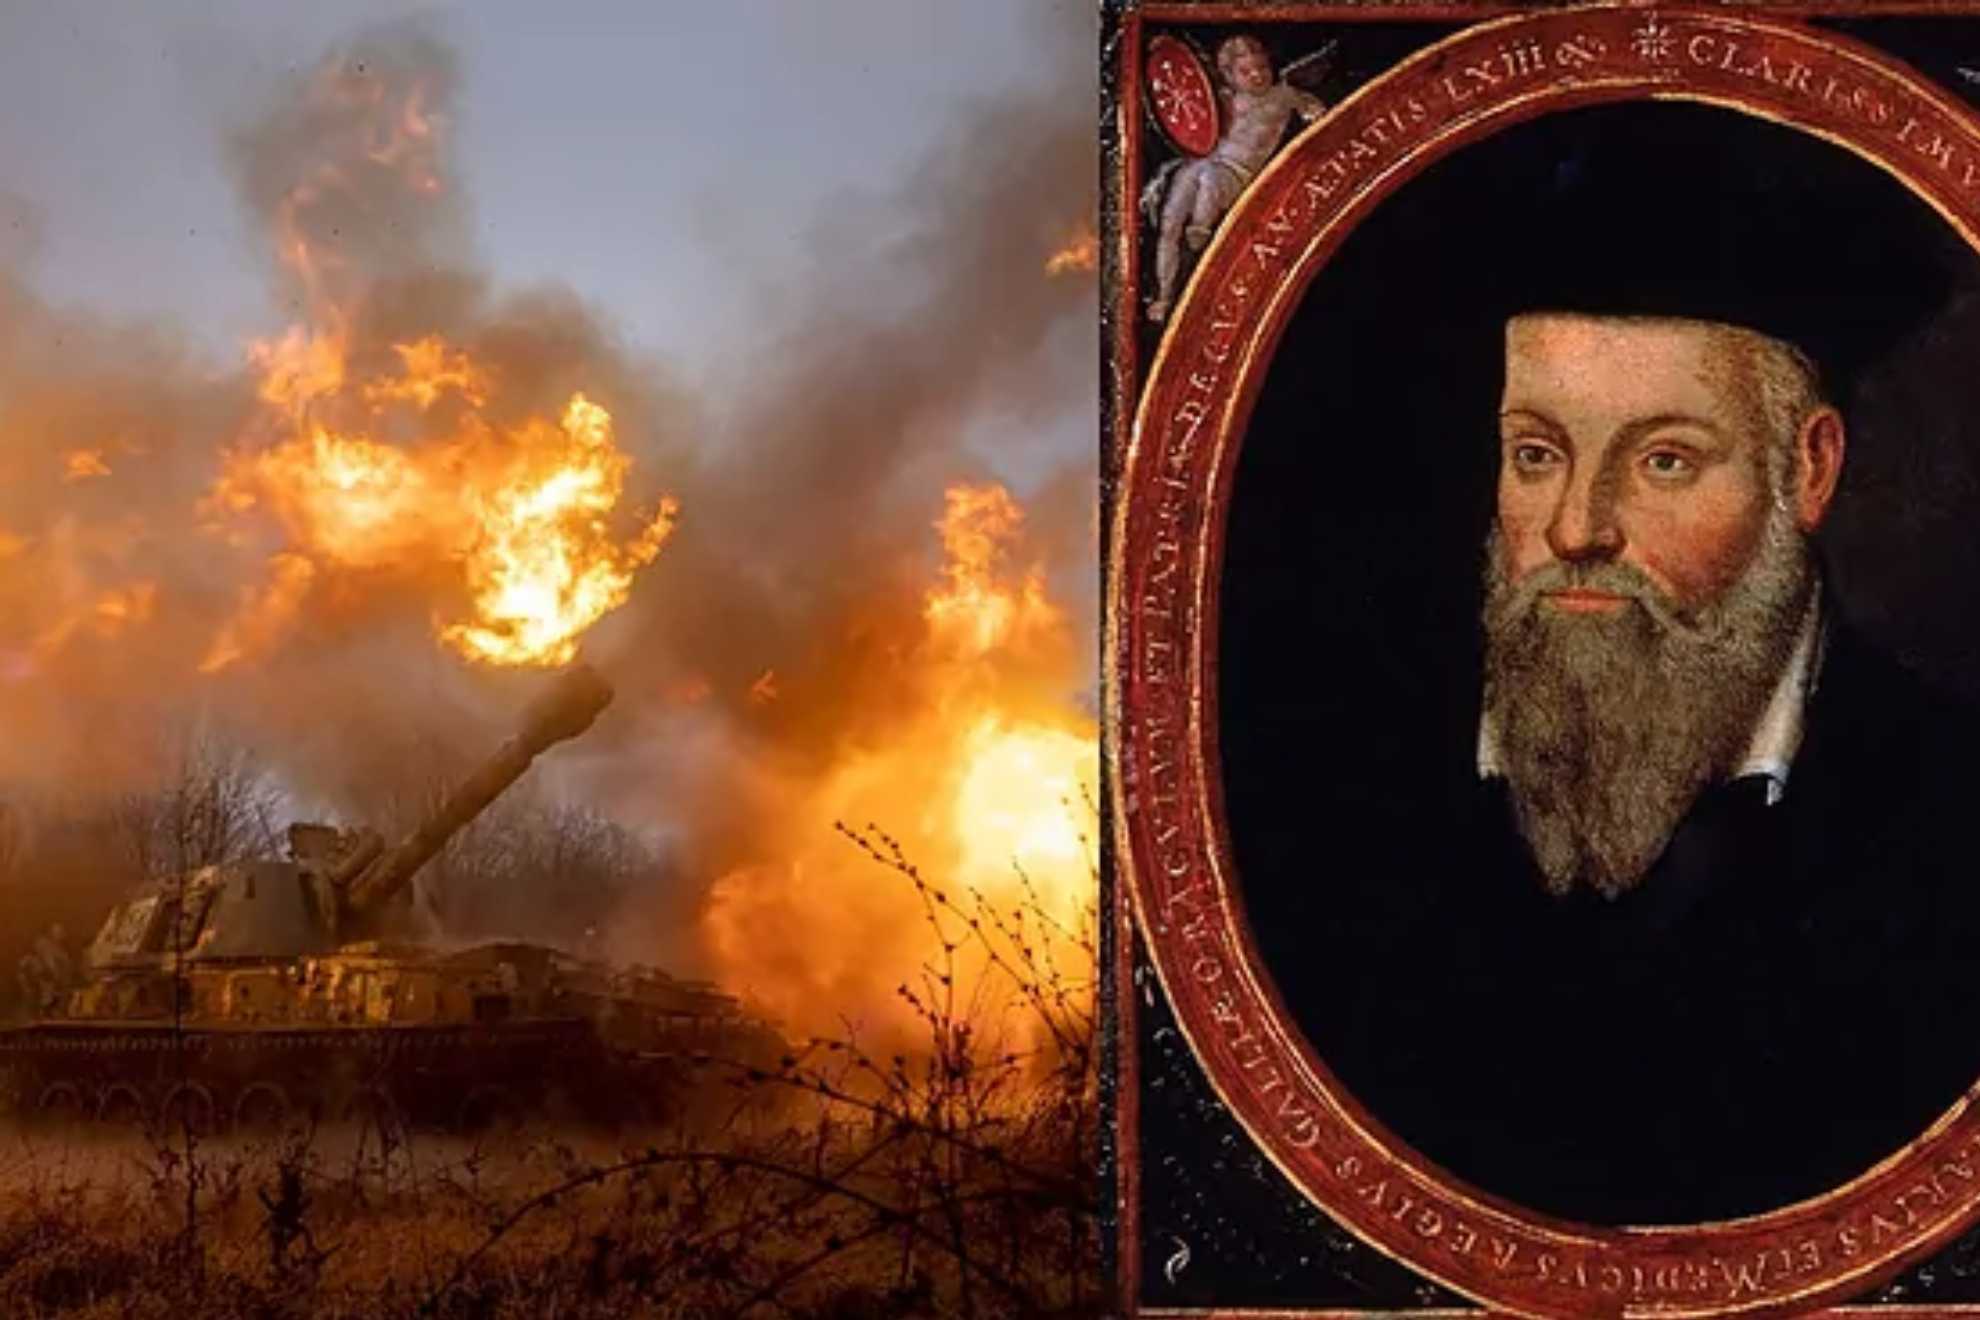 A collage showing a tank on fire and an illustration of Nostradamus.